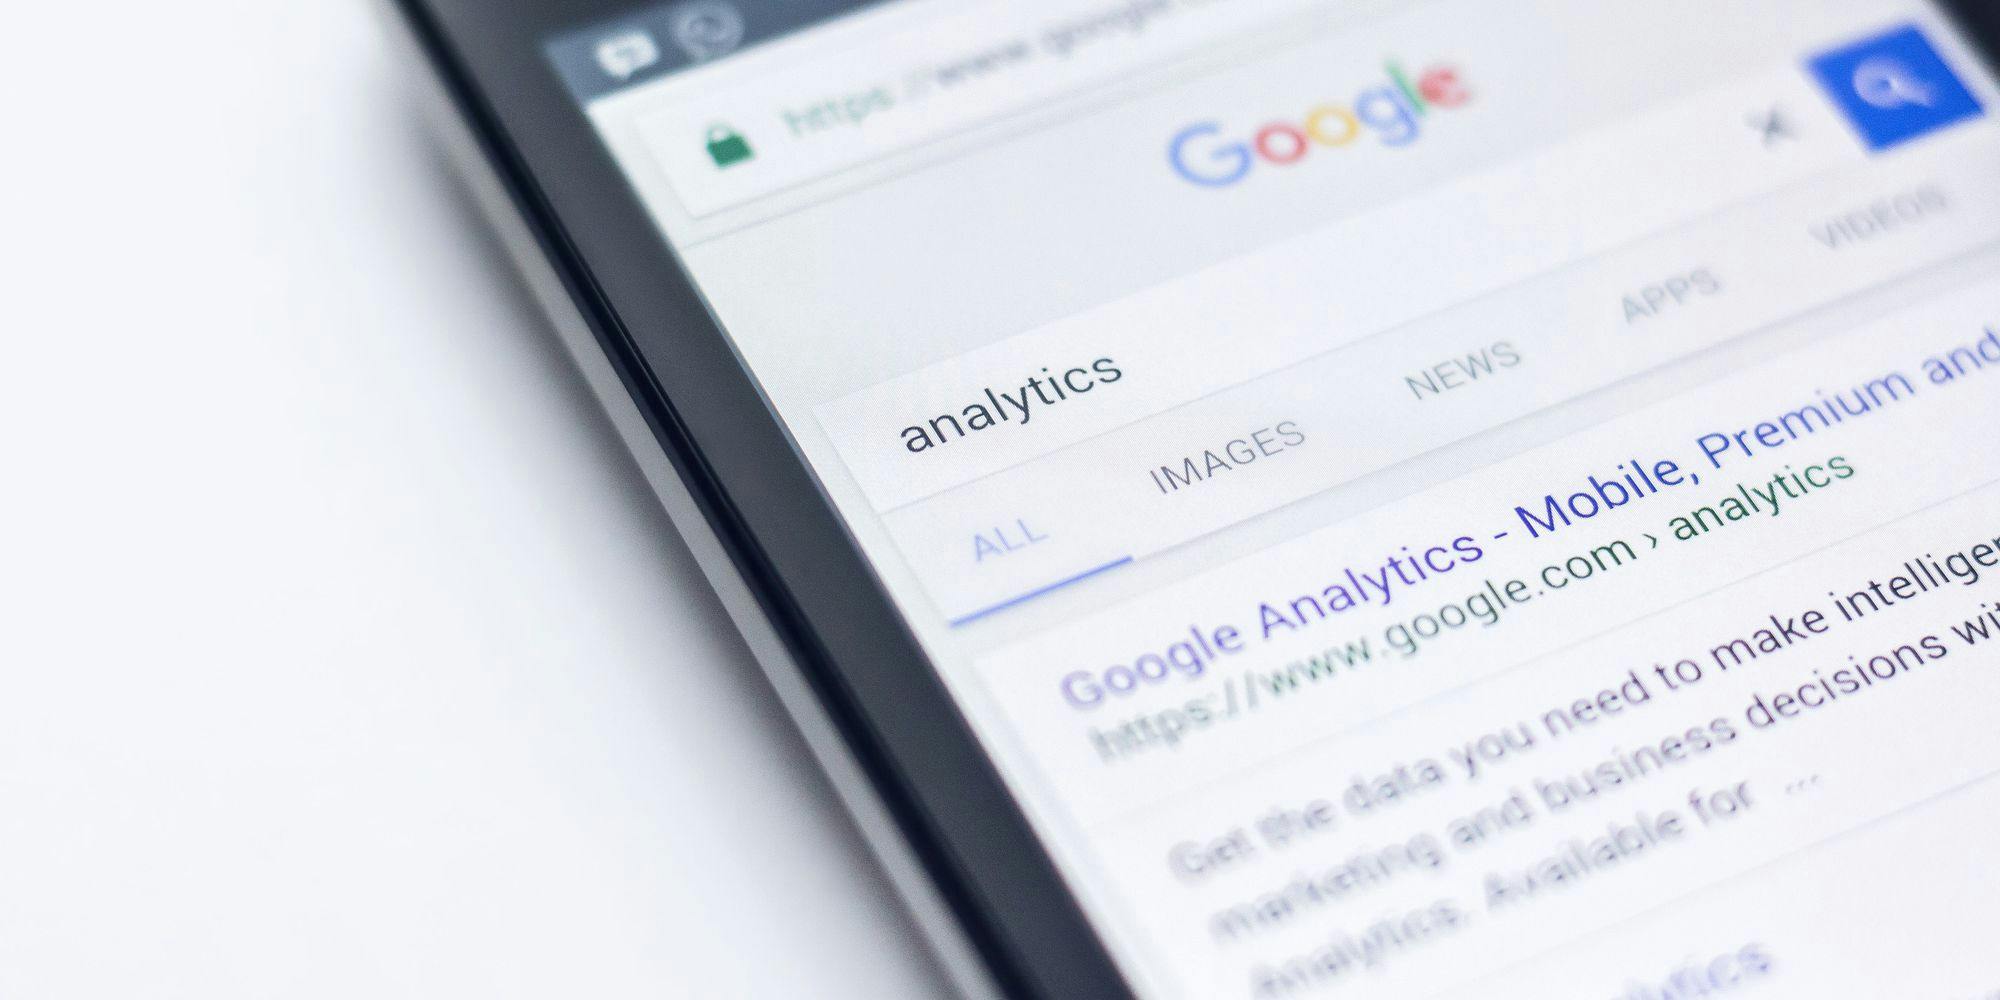 Cover Image for Analyse website and campaign performance with Google Analytics